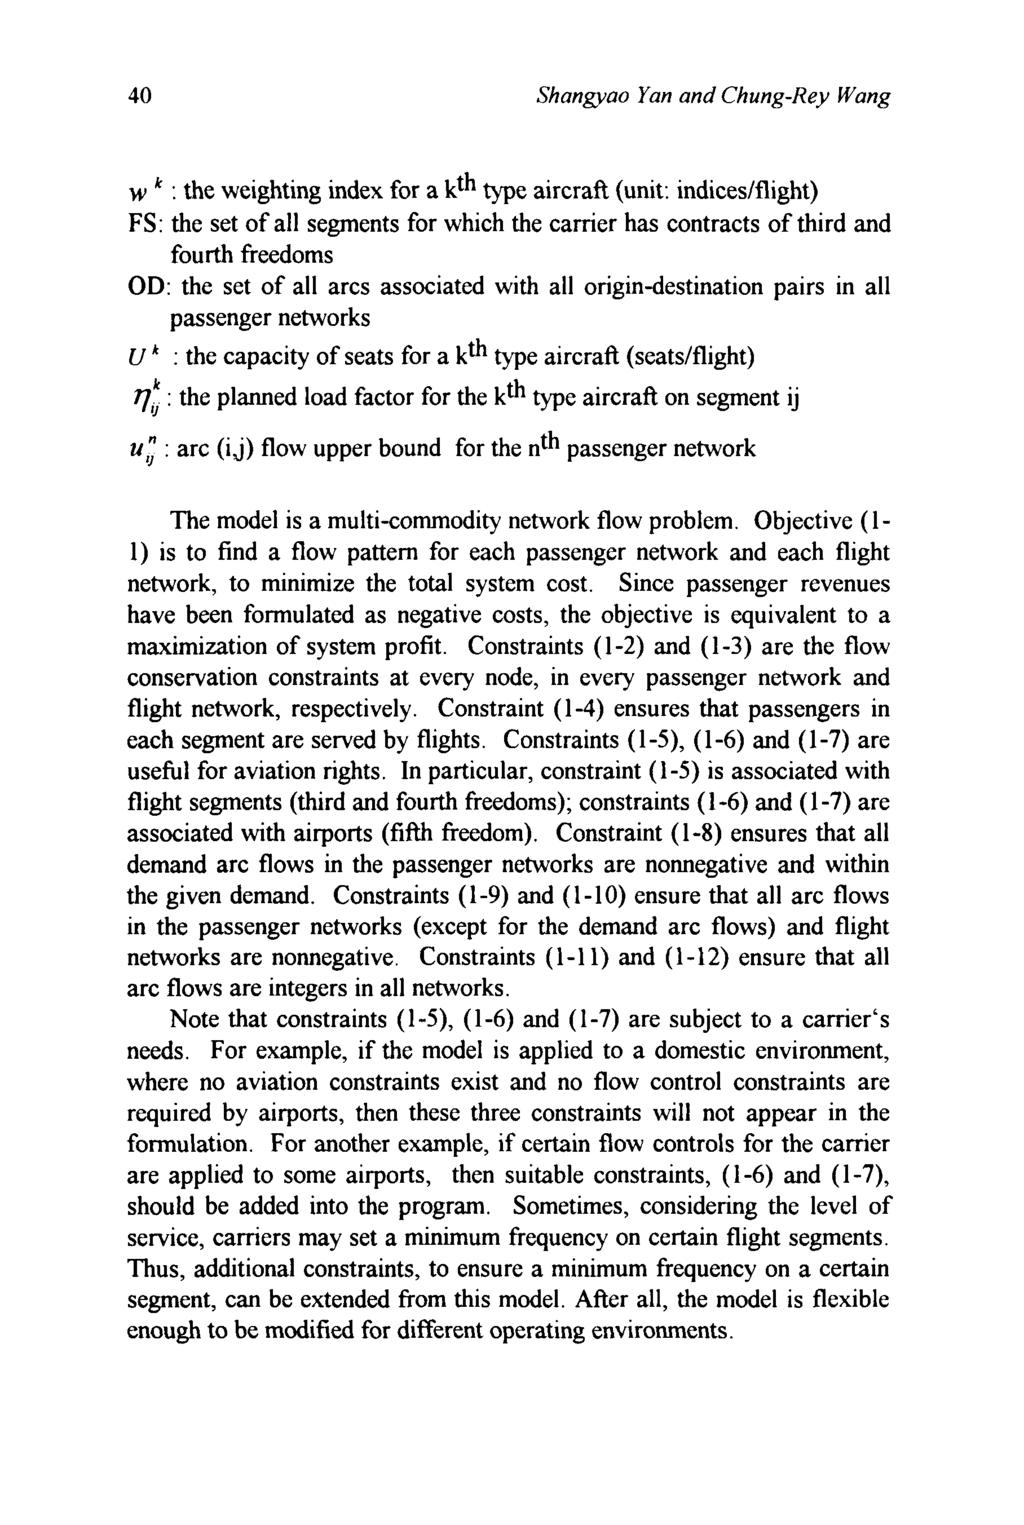 40 Shangyao Yan and Chung-Rey Wang w : the weighting index for a kth type aircraft (unit: indicedflight) FS: the set of all segments for which the carrier has contracts of third and fourth freedoms